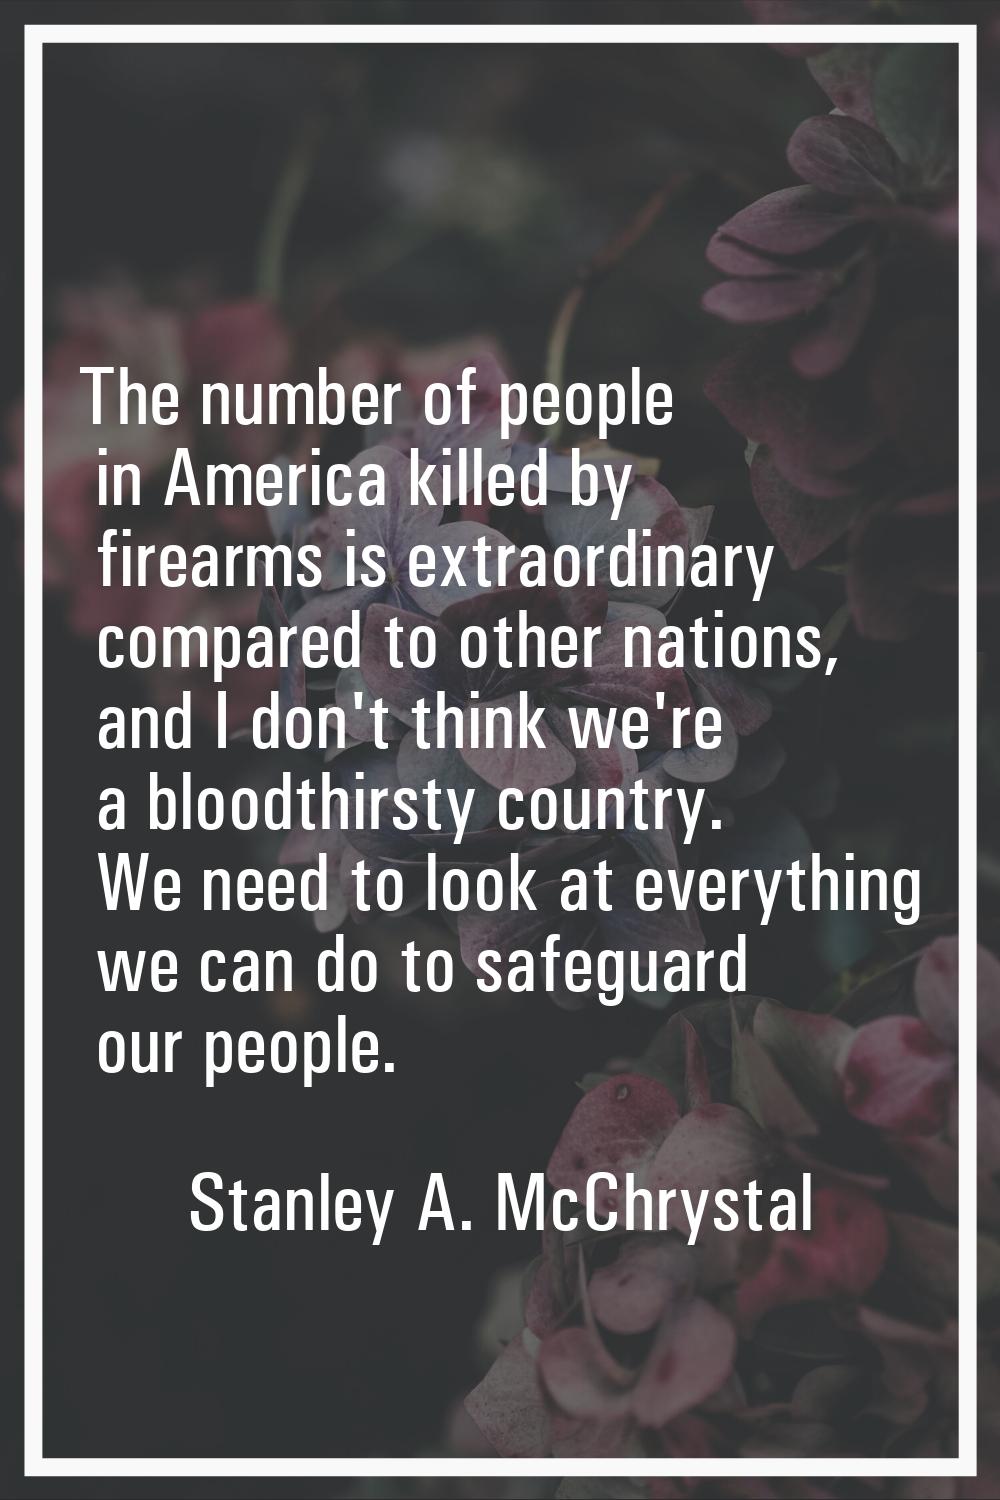 The number of people in America killed by firearms is extraordinary compared to other nations, and 